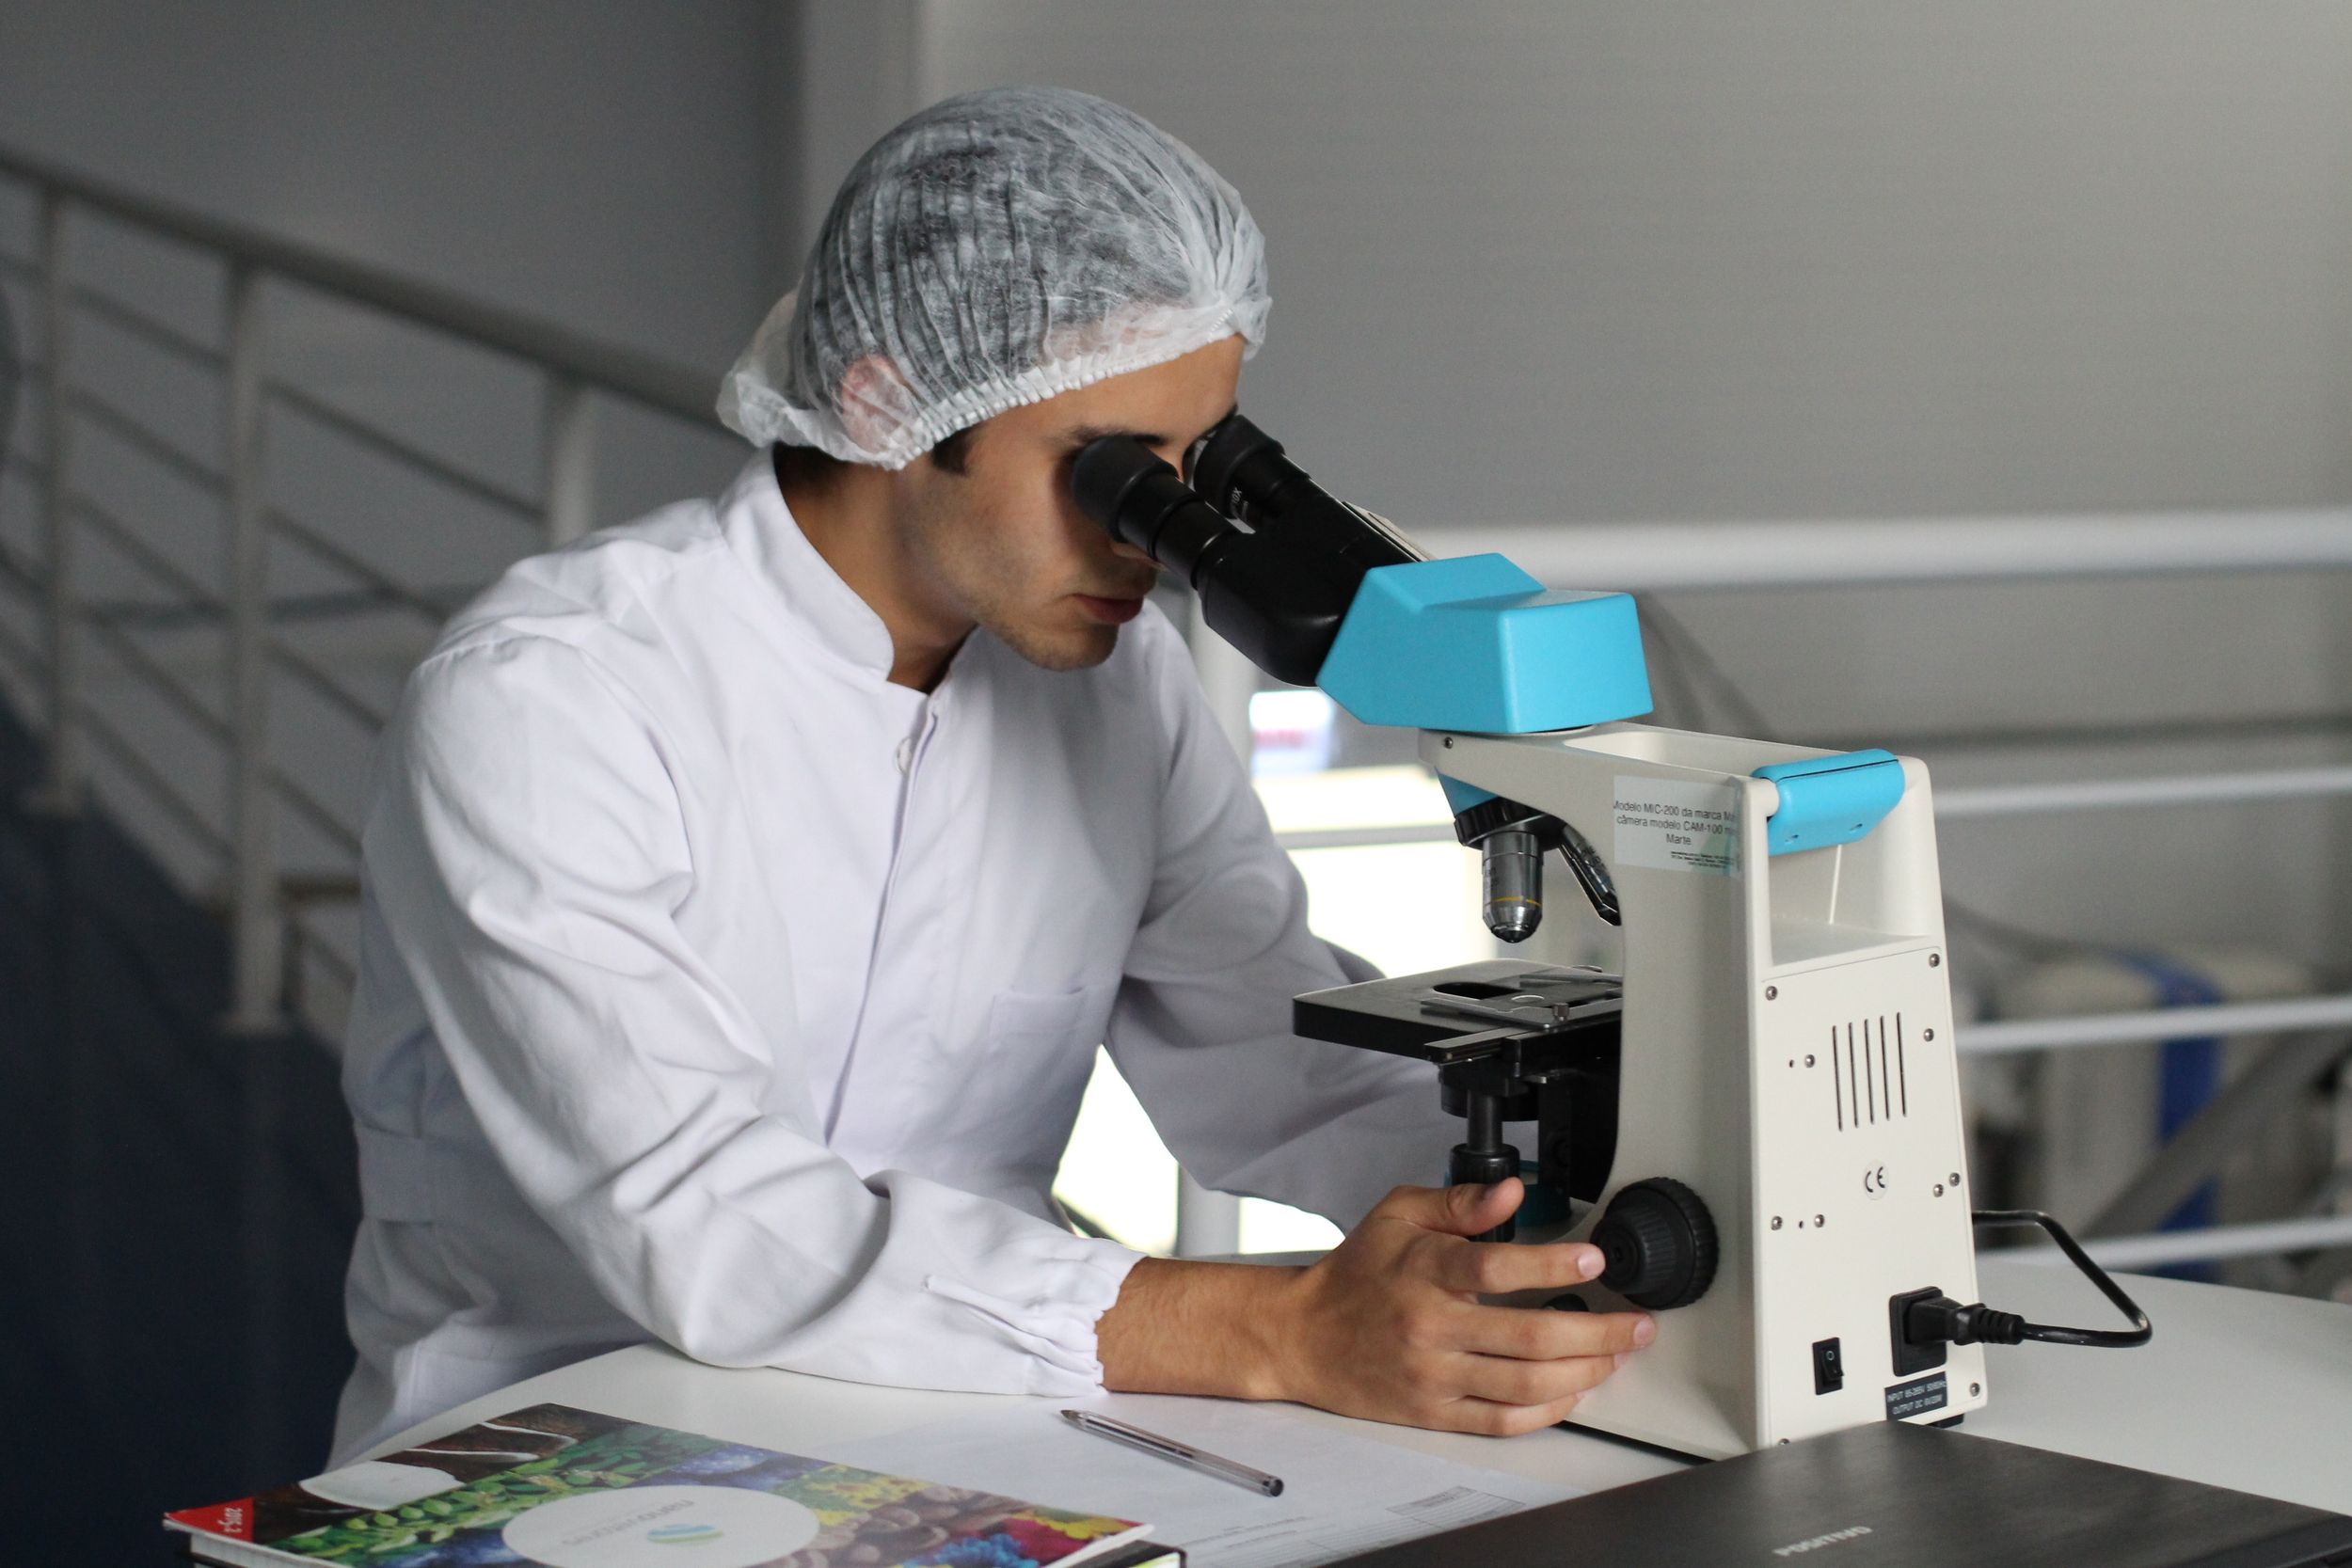 Researcher examining something in a microscope.